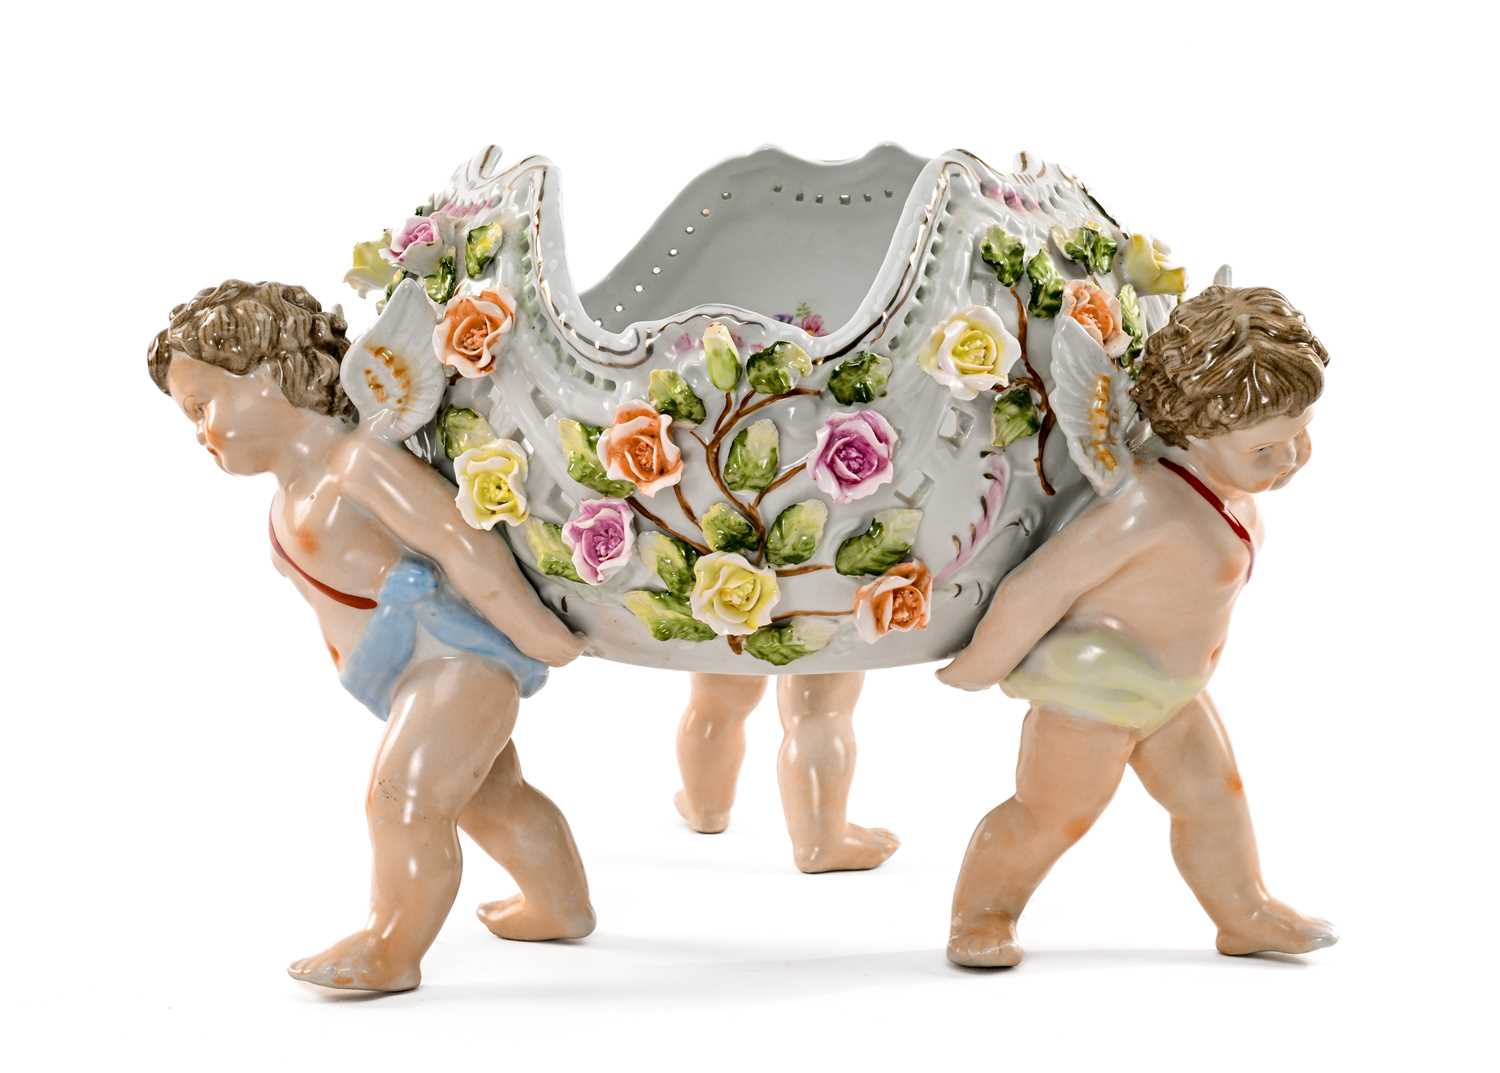 GERMAN PORCELAIN FIGURAL TABLE CENTREPIECE, the pierced, floral-encrusted bowl held by three